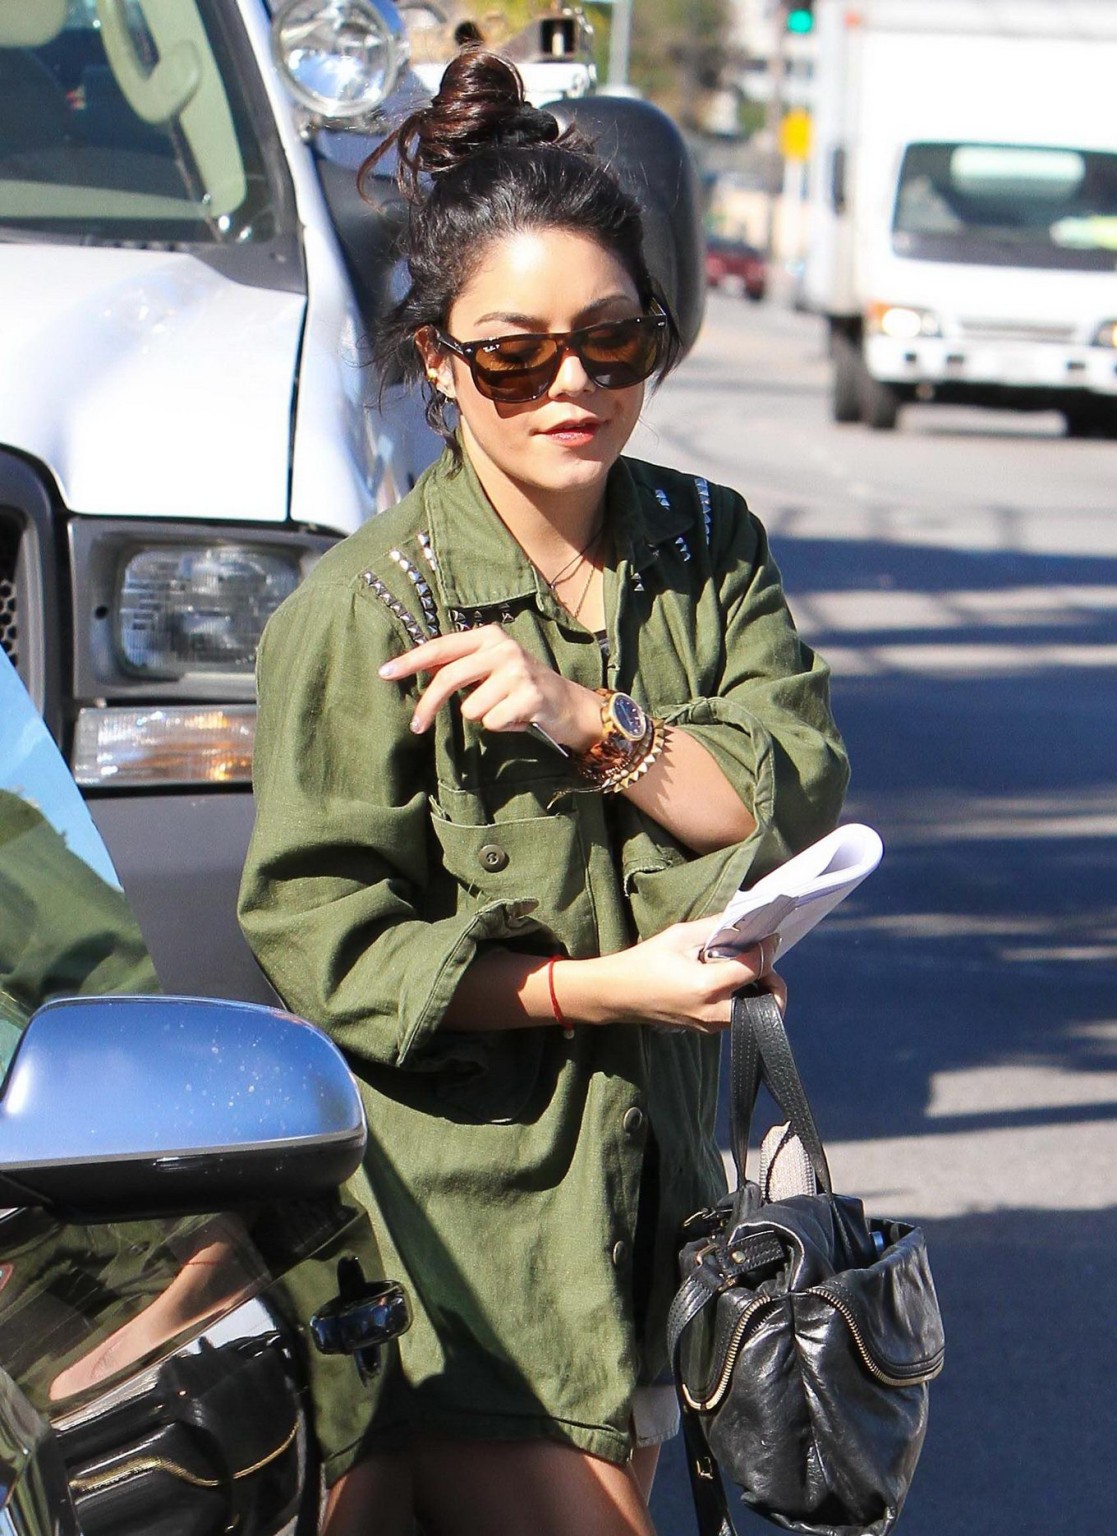 Vanessa hudgens leggy wearing hotpants fuckme boots out in hollywood
 #75276822